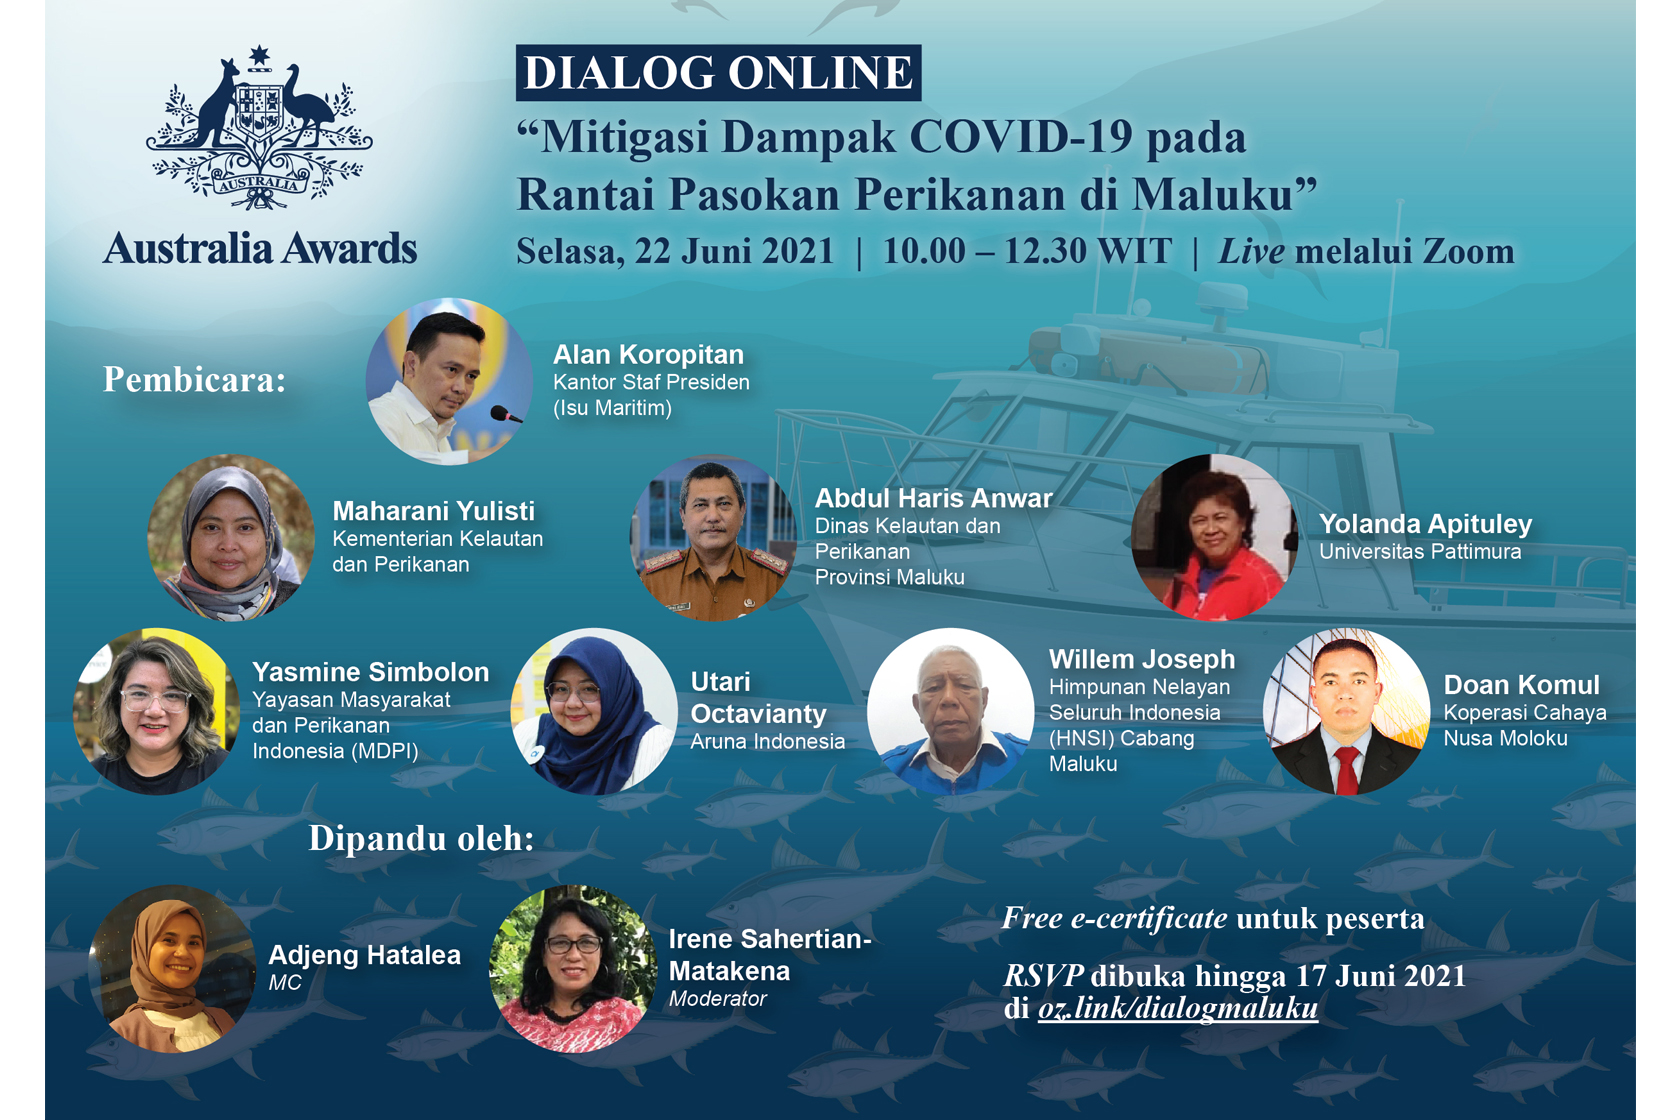 Join us in the Online Dialogue on Mitigating Impact of COVID-19 Pandemic on Fishery Supply Chain in Maluku